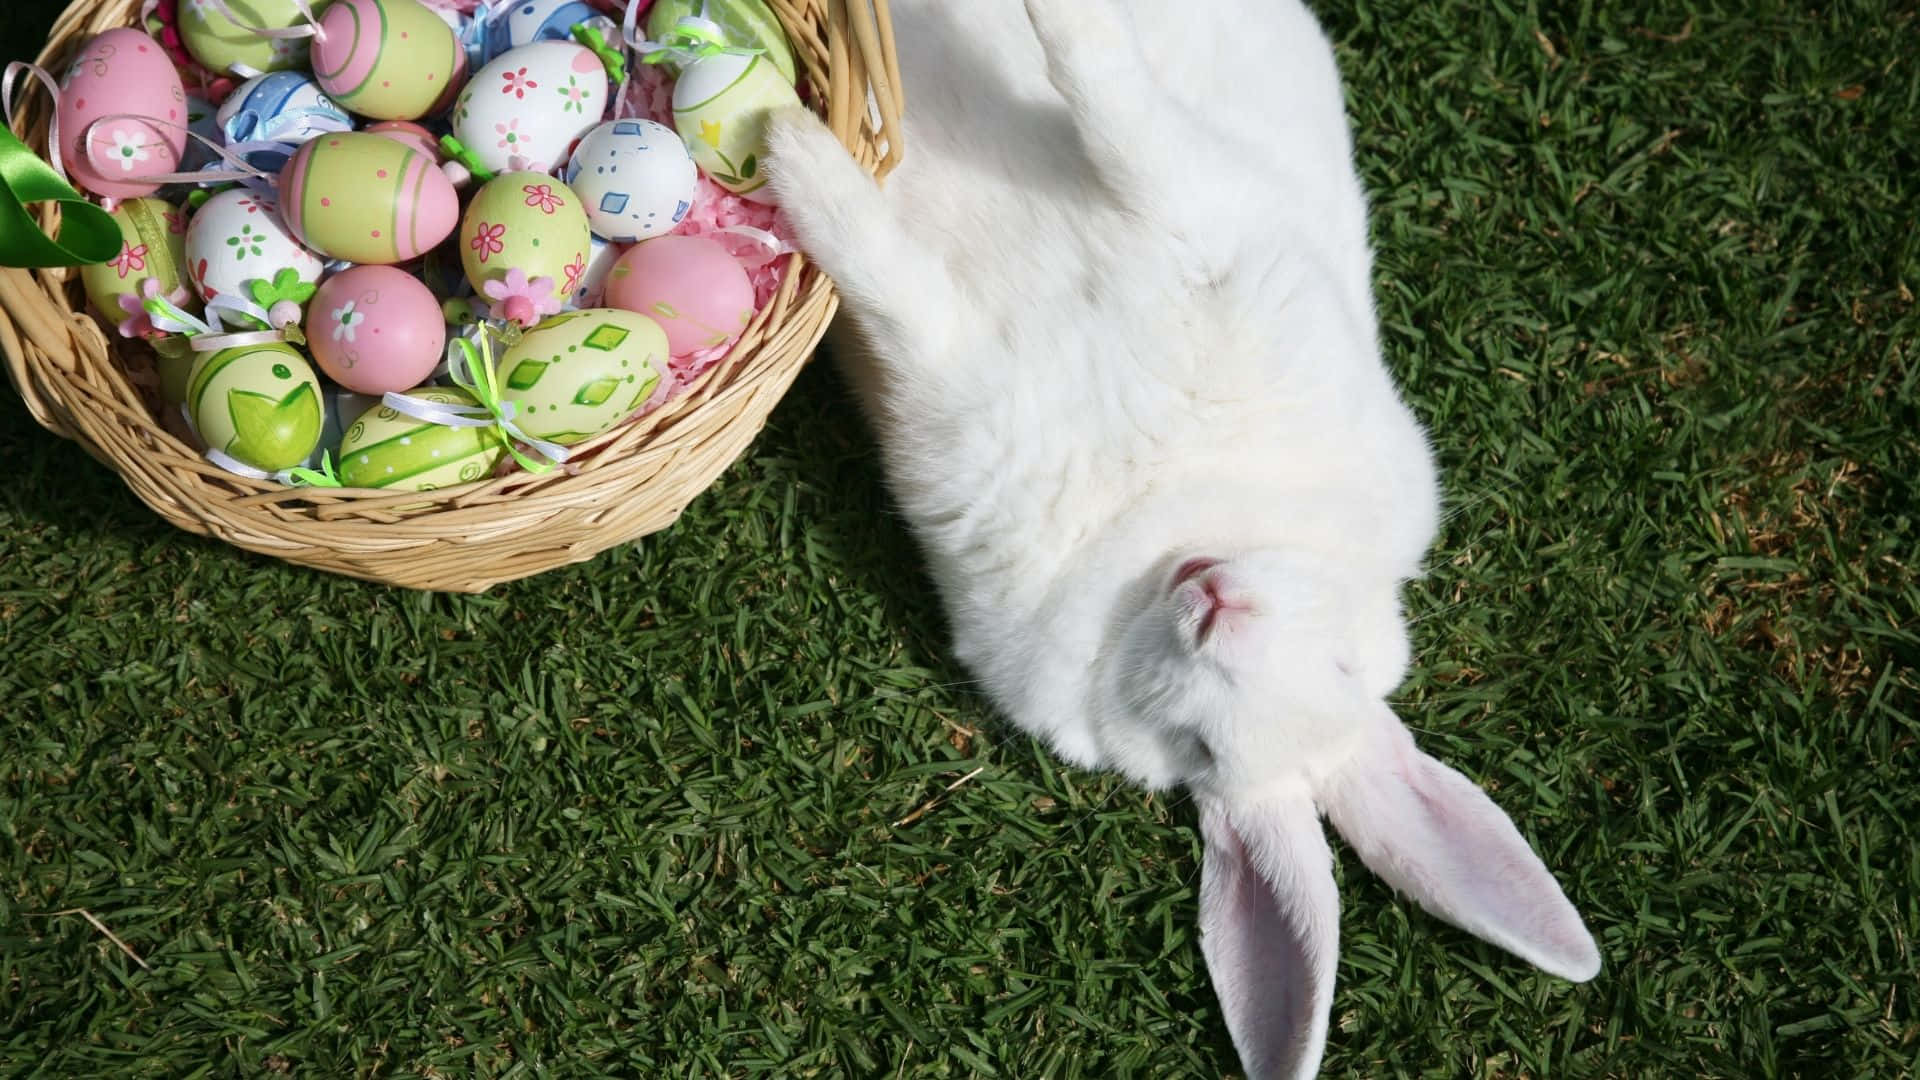 Celebrate Easter With The Easter Bunny!